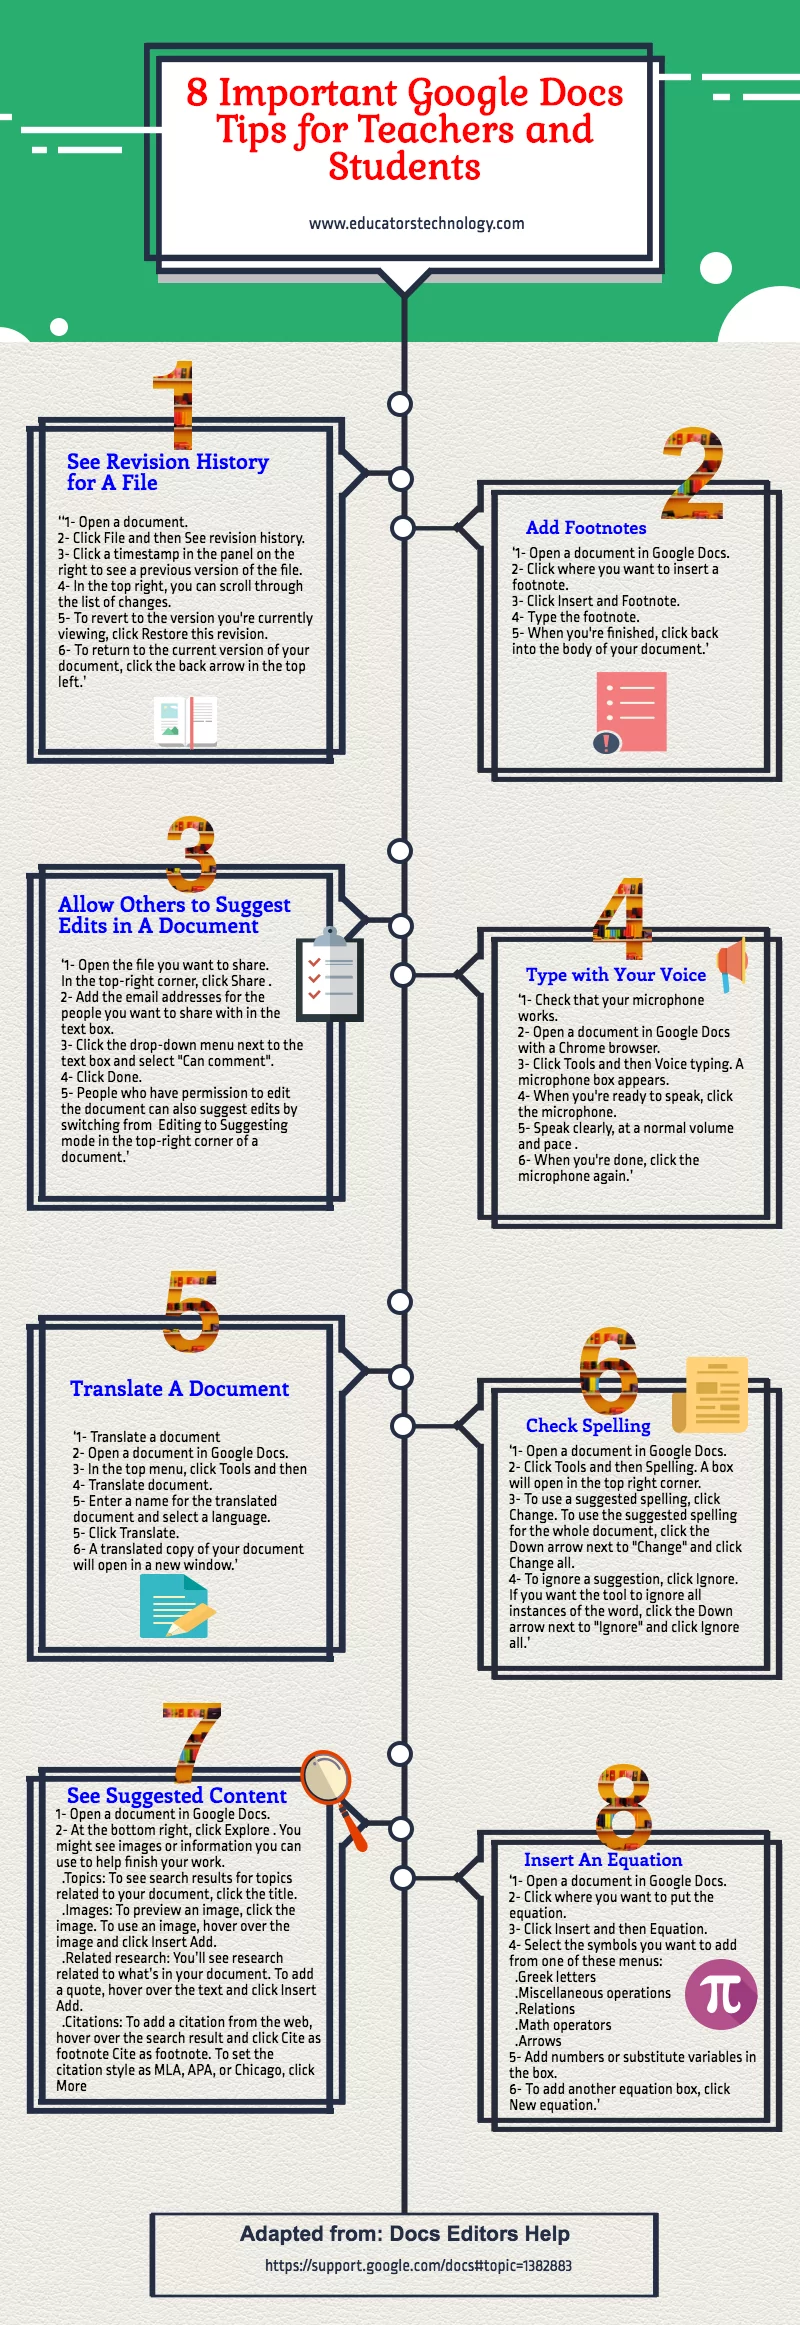 8 Important Google Docs Tips for Teachers and Students